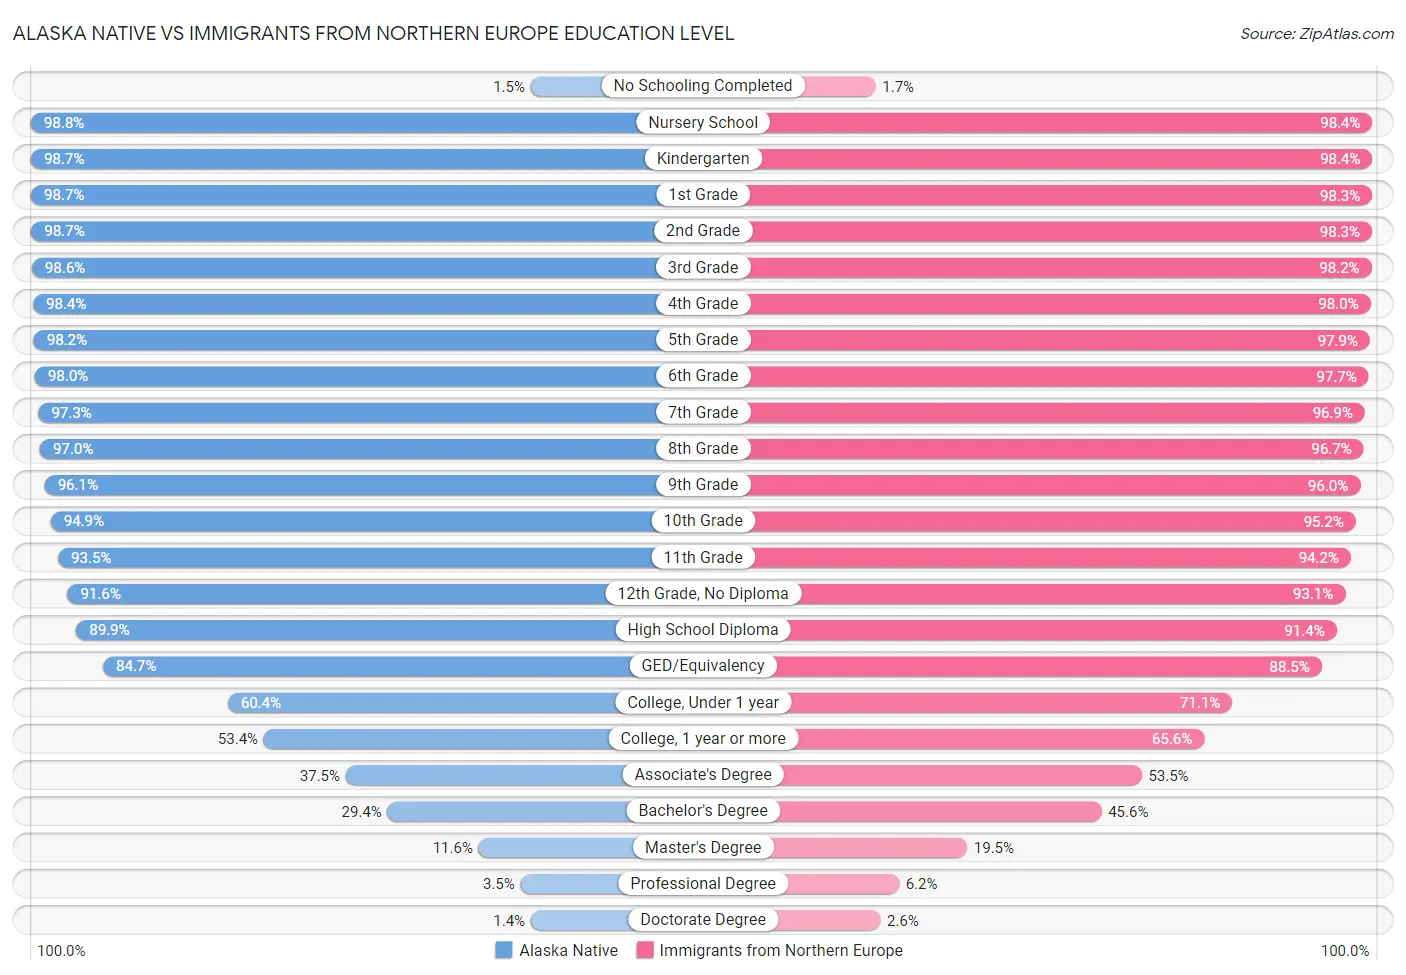 Alaska Native vs Immigrants from Northern Europe Education Level